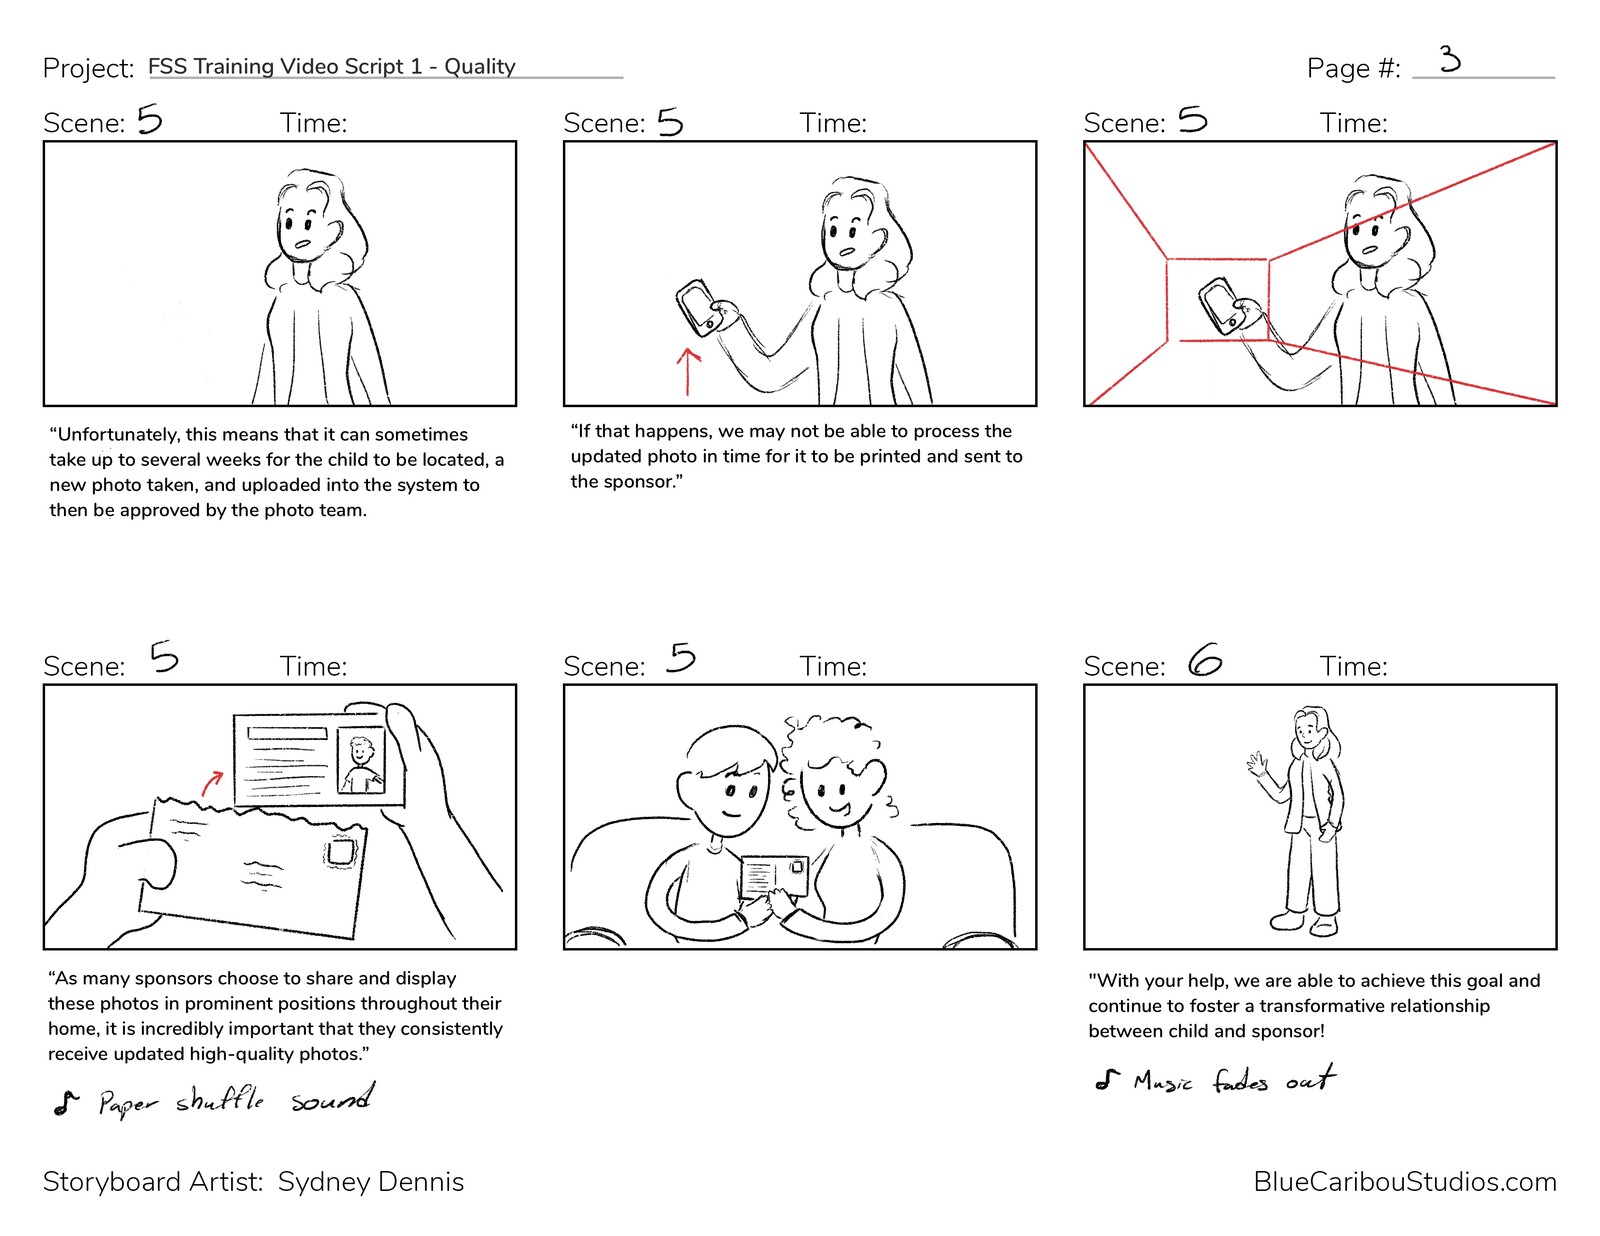 These storyboards were put together quickly for efficiency. 